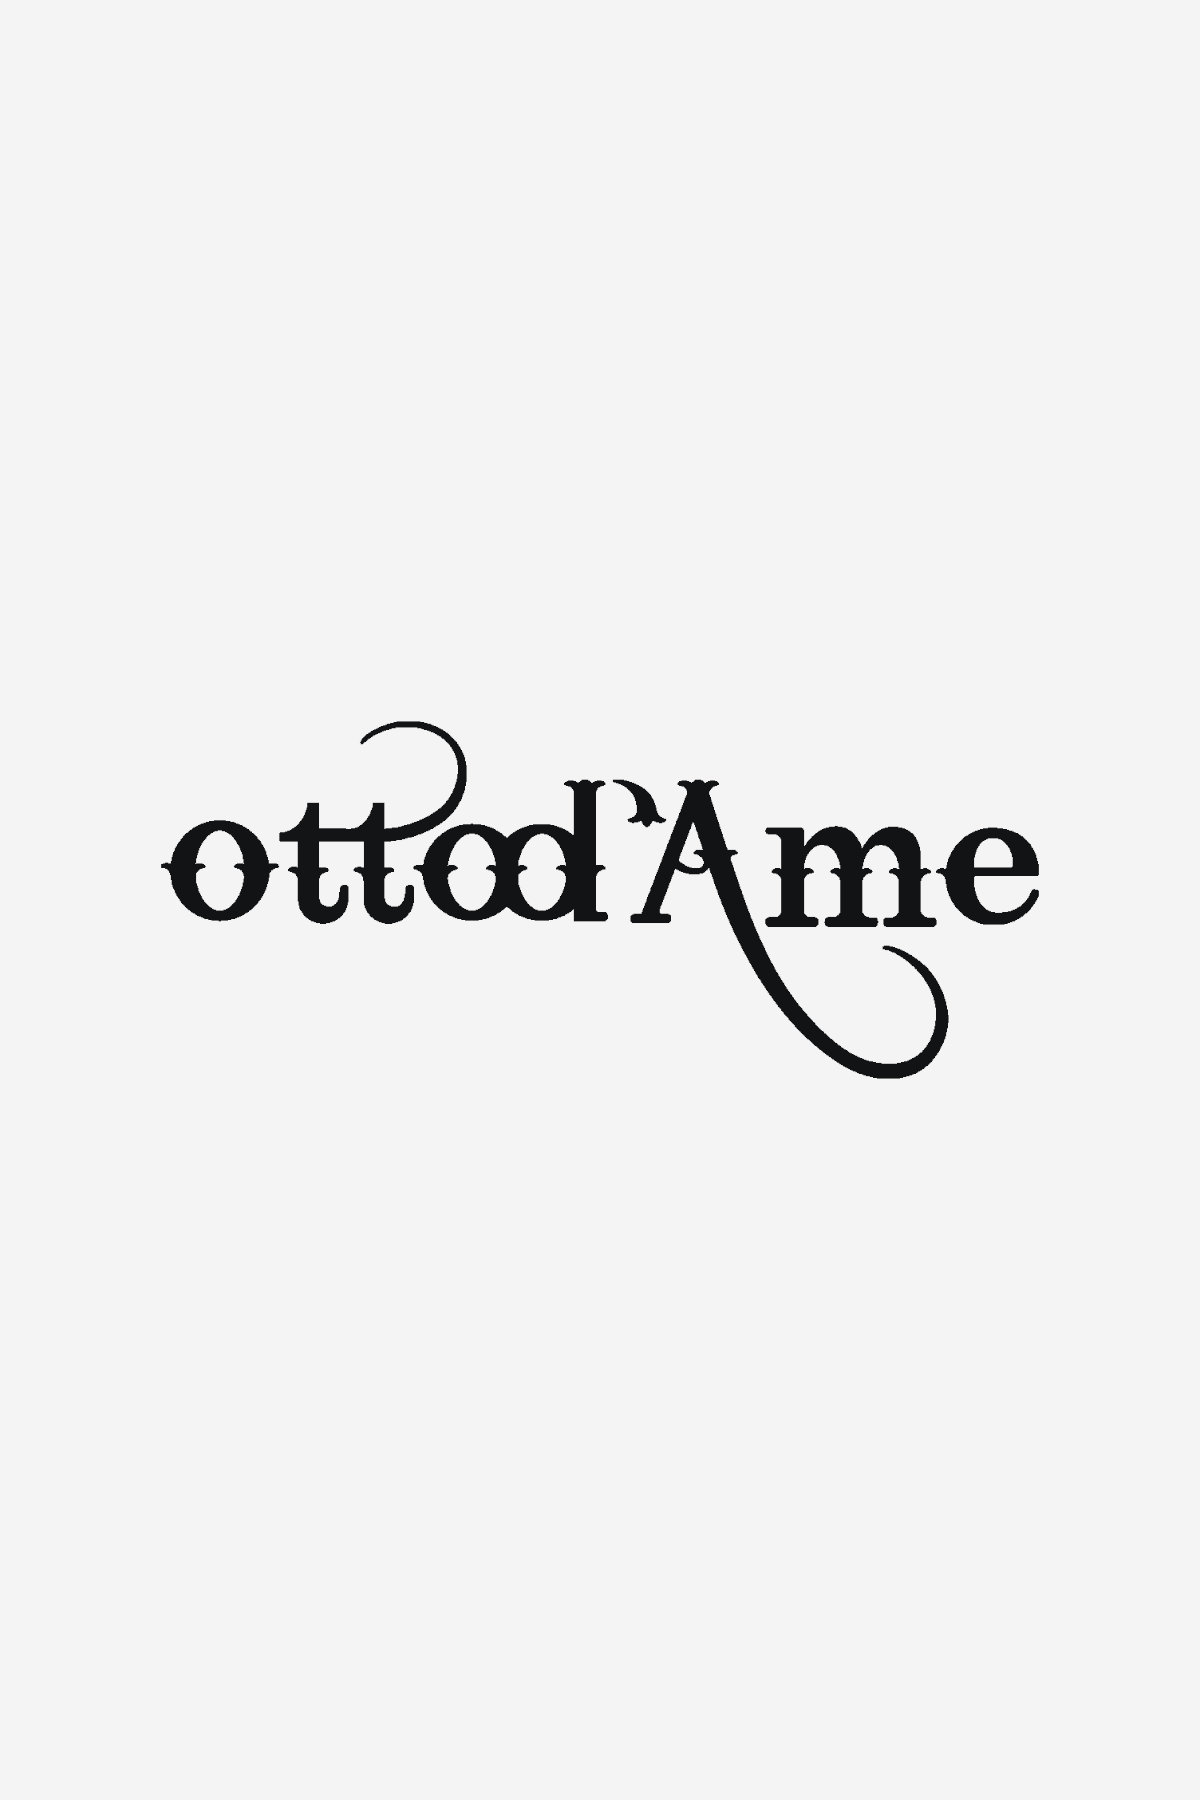 ottod'Ame | Italian clothing for women: casual chic style